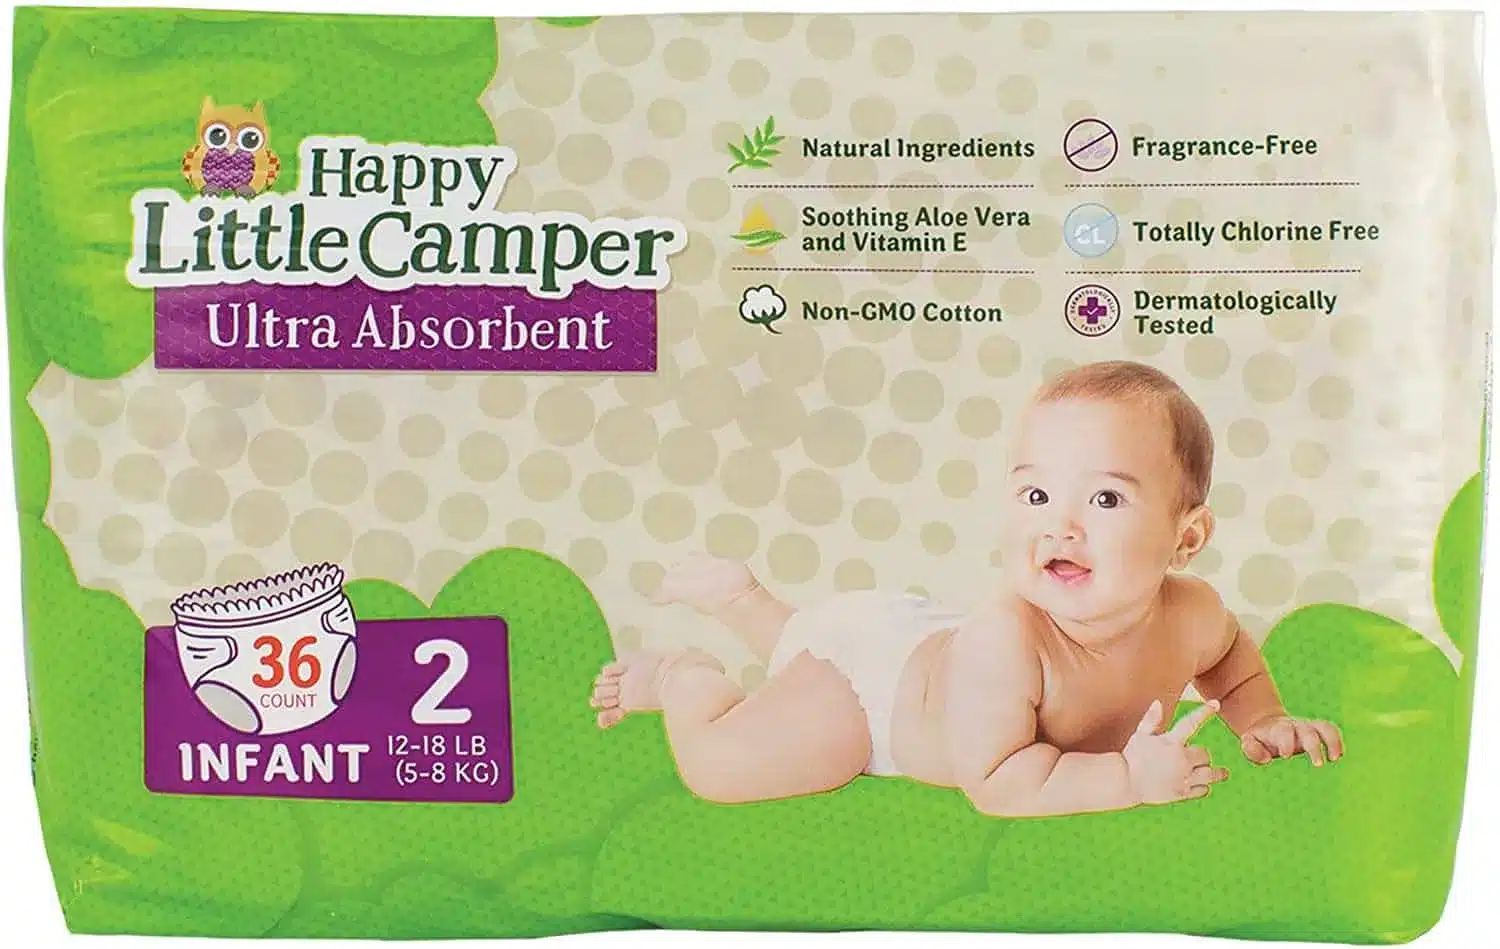 Image of Happy Little Camper Natural Baby diapers. | Gimme The Good Stuff		